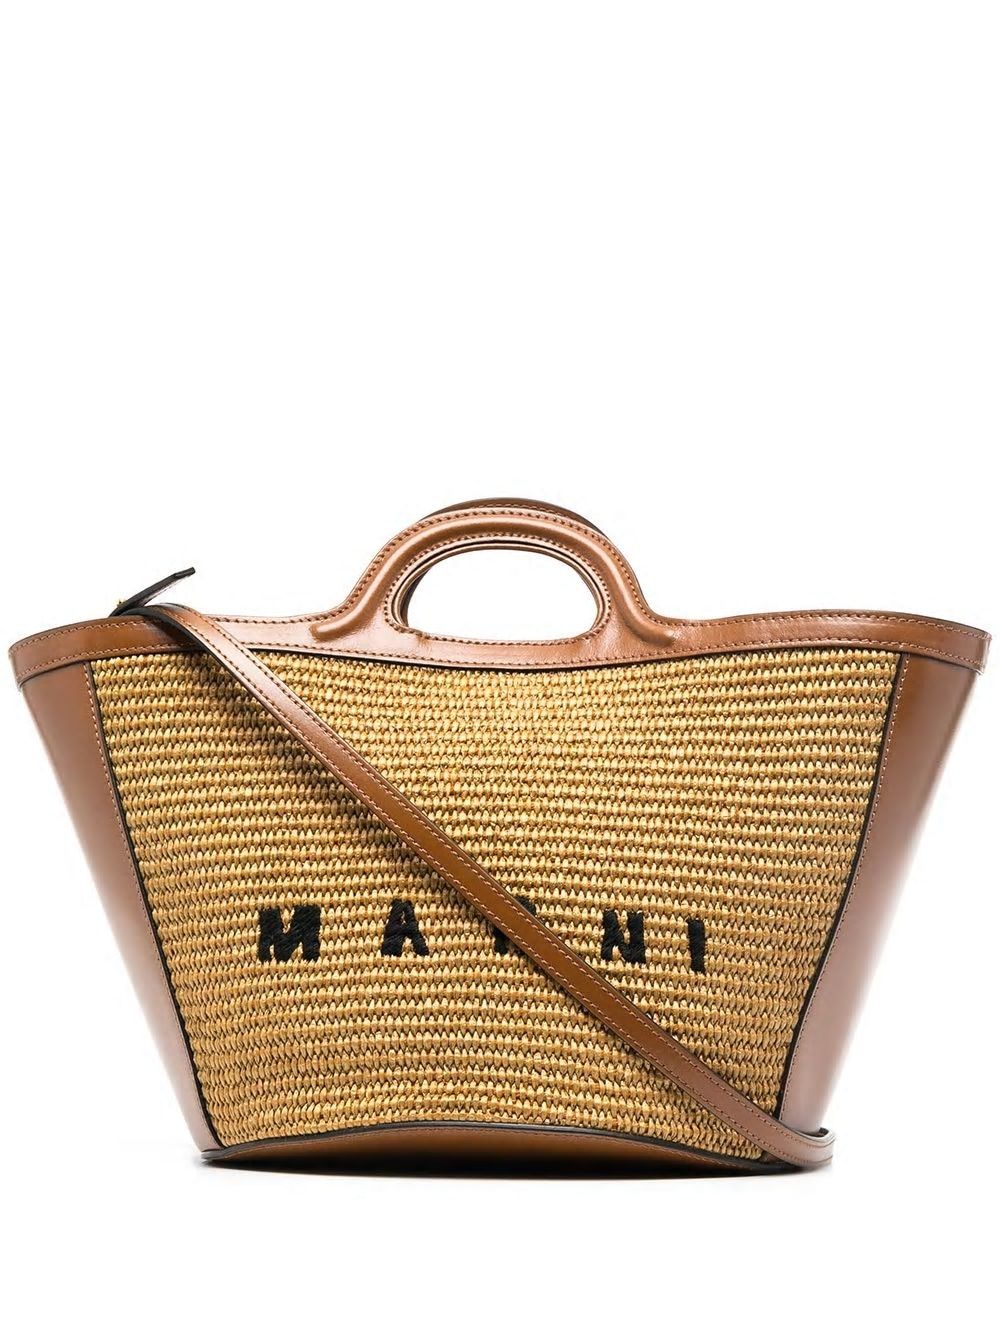 MARNI Tropical Mini Beige Tote Bag for Women - Cotton and Leather Blend 40cm x 27cm x 21cm